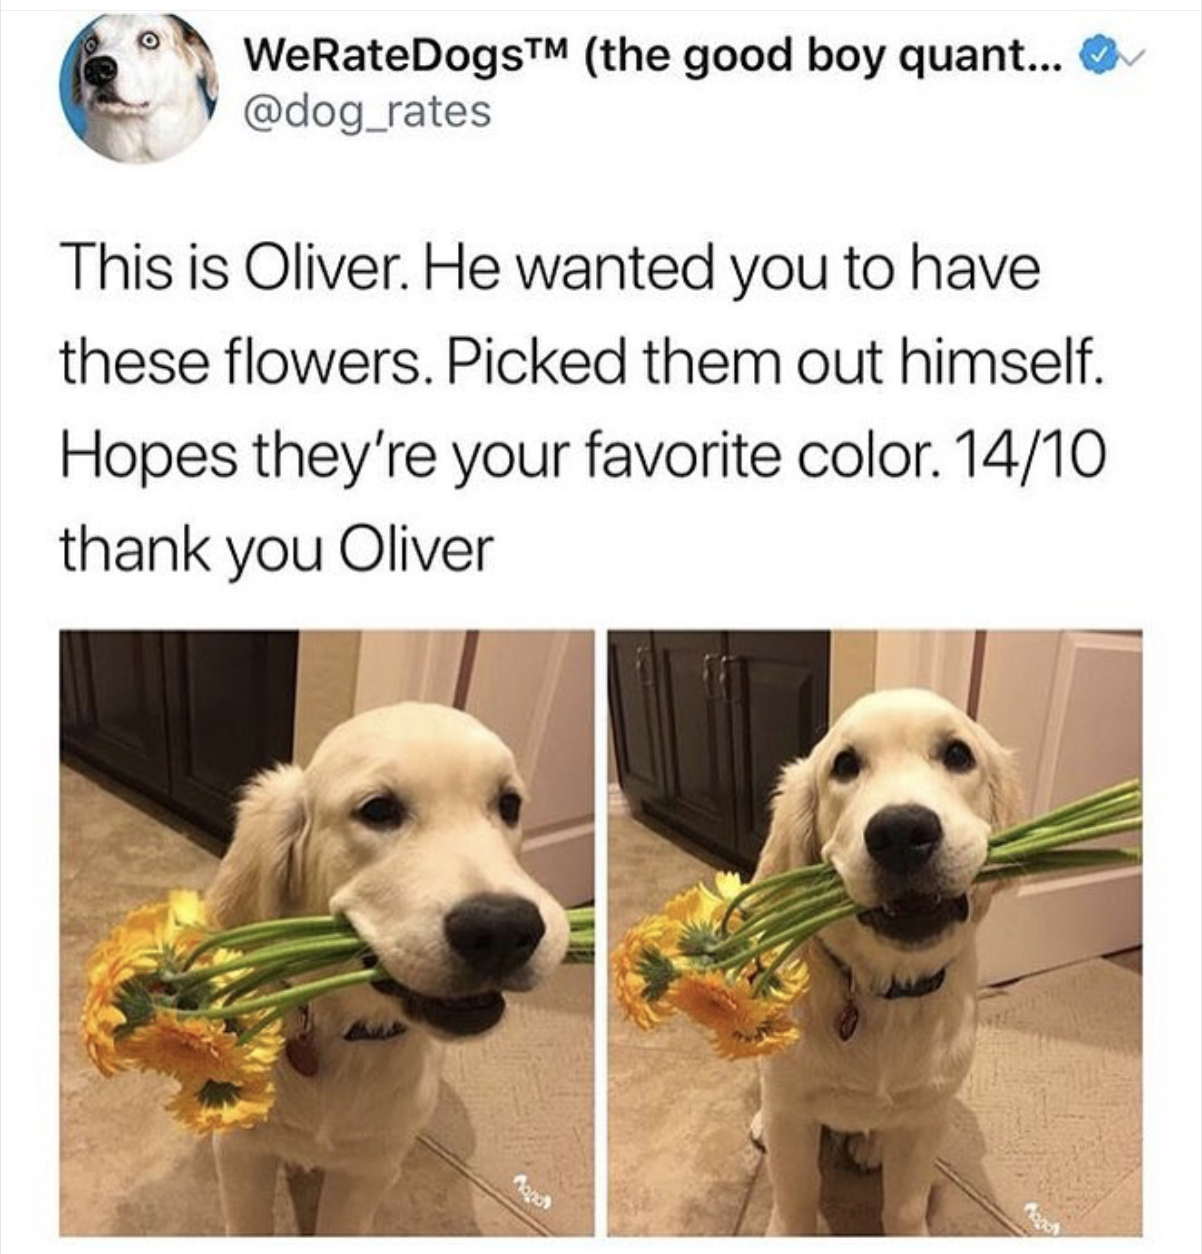 wholesome puppy memes - WeRateDogs the good boy quant... rates This is Oliver. He wanted you to have these flowers. Picked them out himself. Hopes they're your favorite color. 1410 thank you Oliver